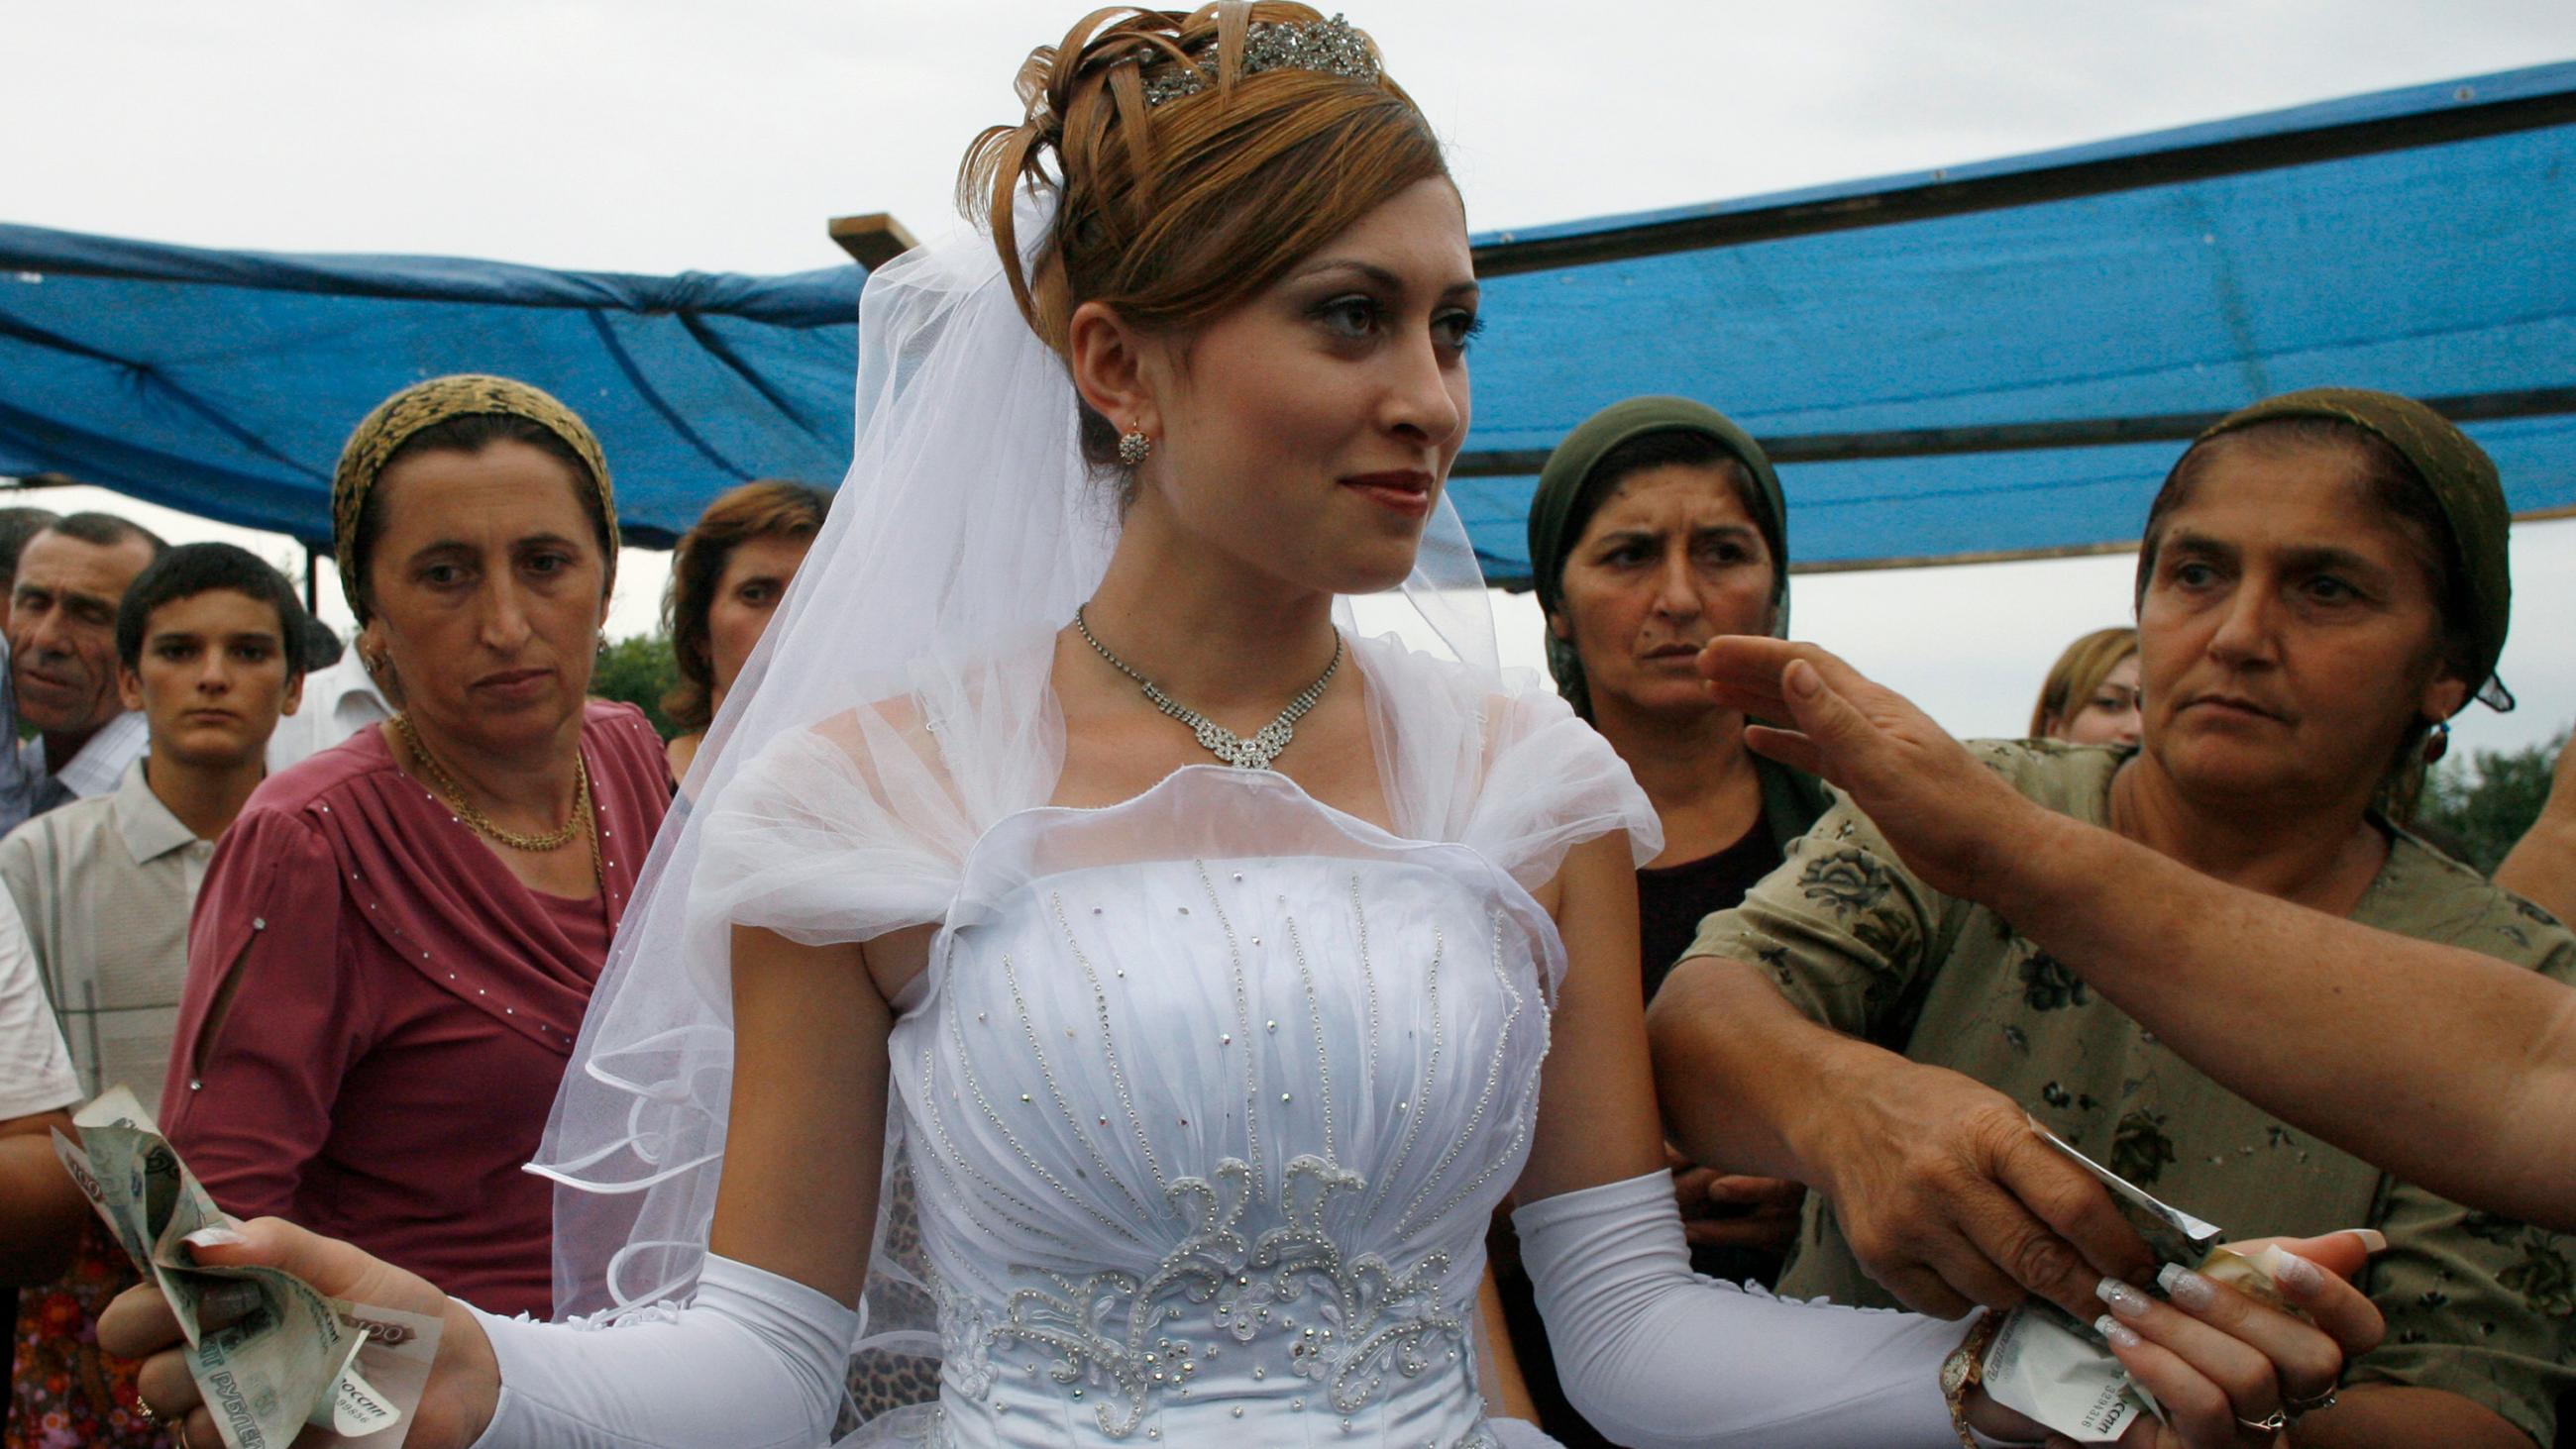 The photo shows a bride at the center of the frame surrounded by older women. 